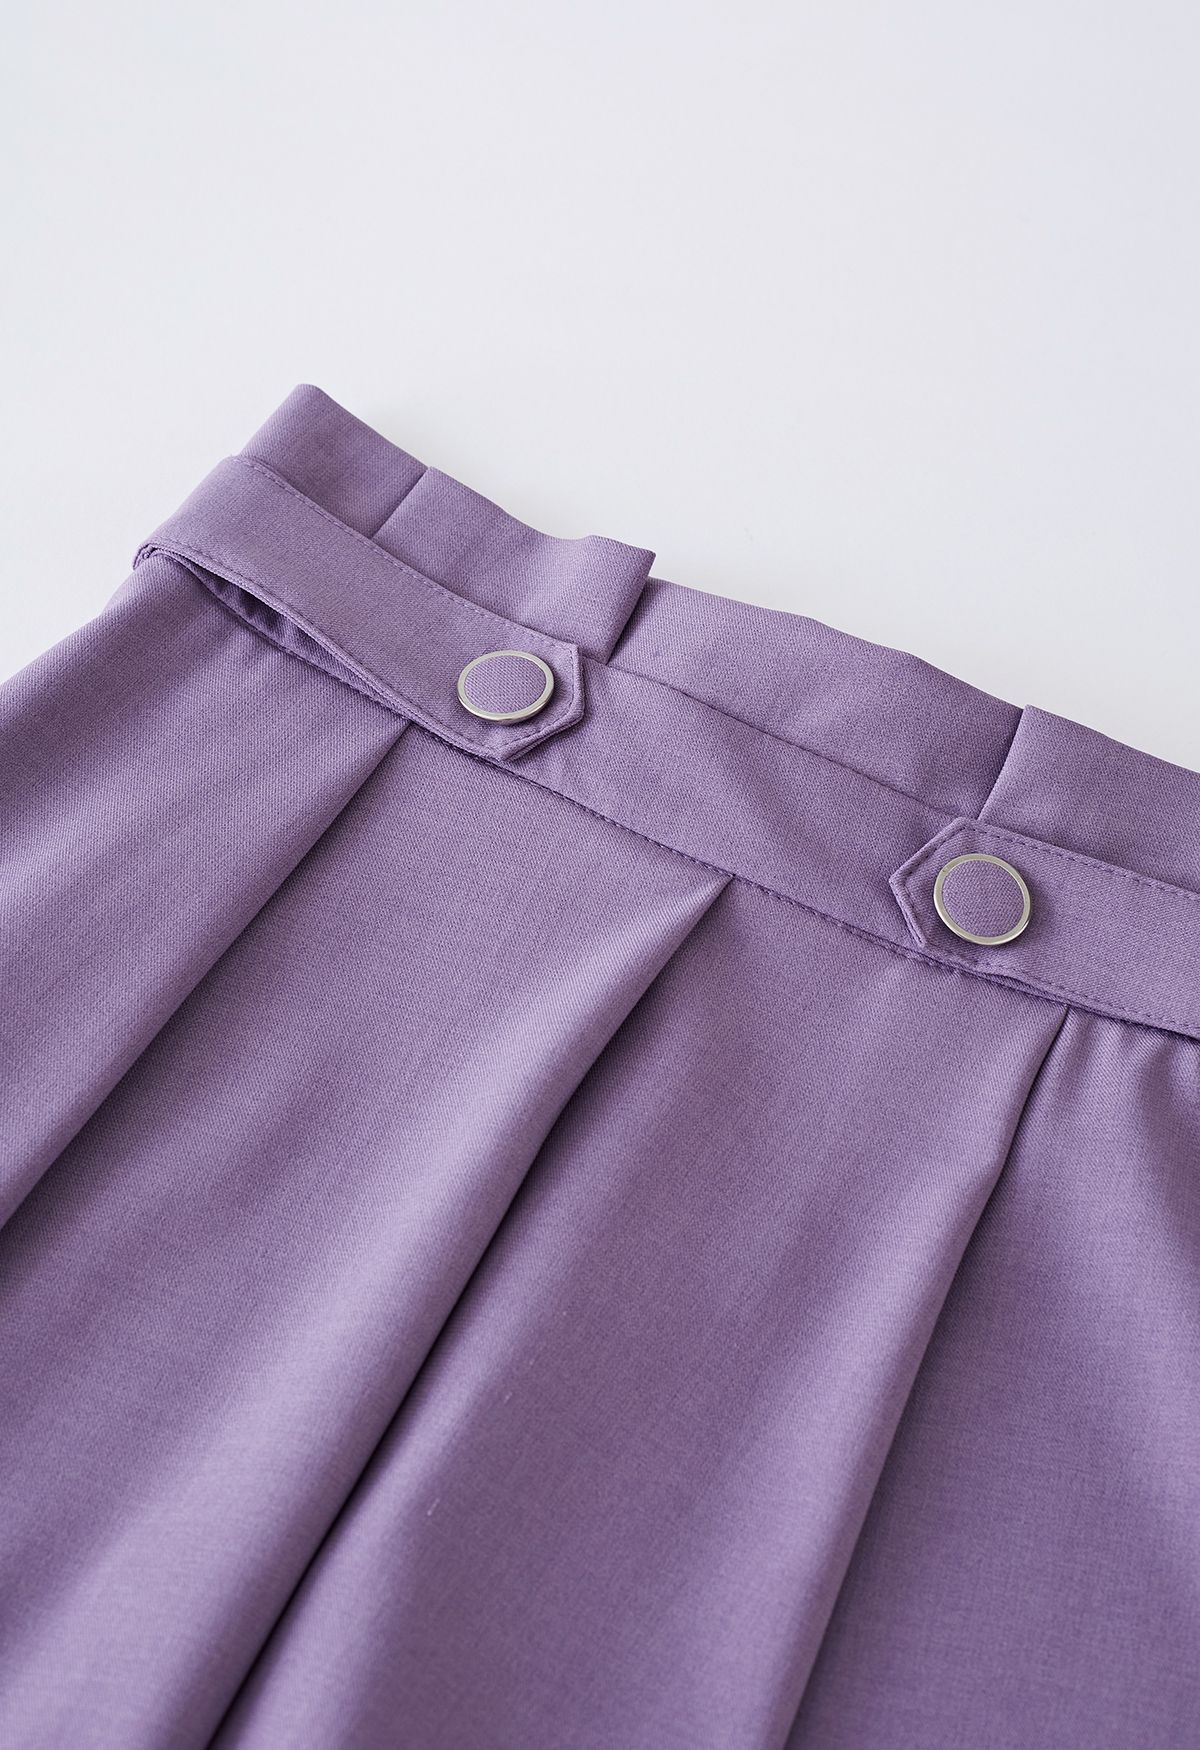 Pleated Buttoned Waist A-Line Midi Skirt in Lilac - Retro, Indie and ...